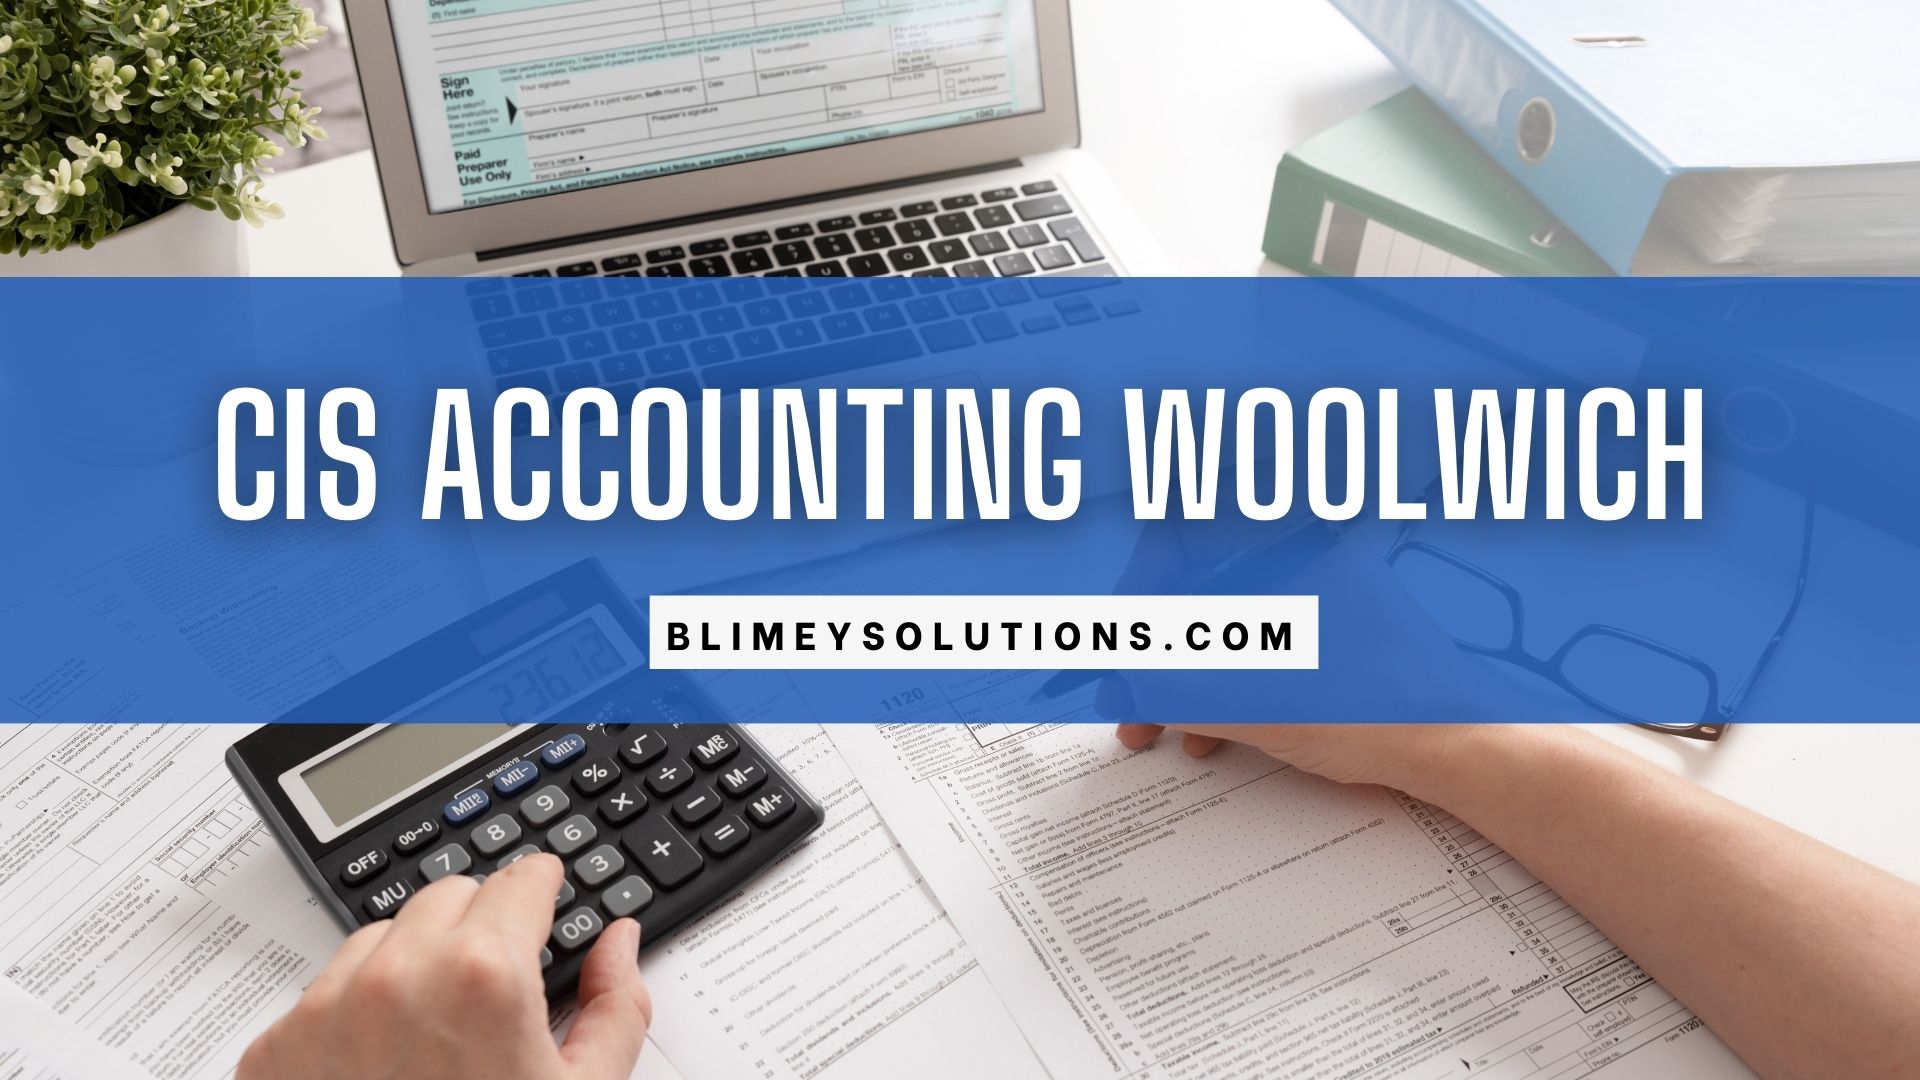 Cis Accounting In Woolwich Se18 London